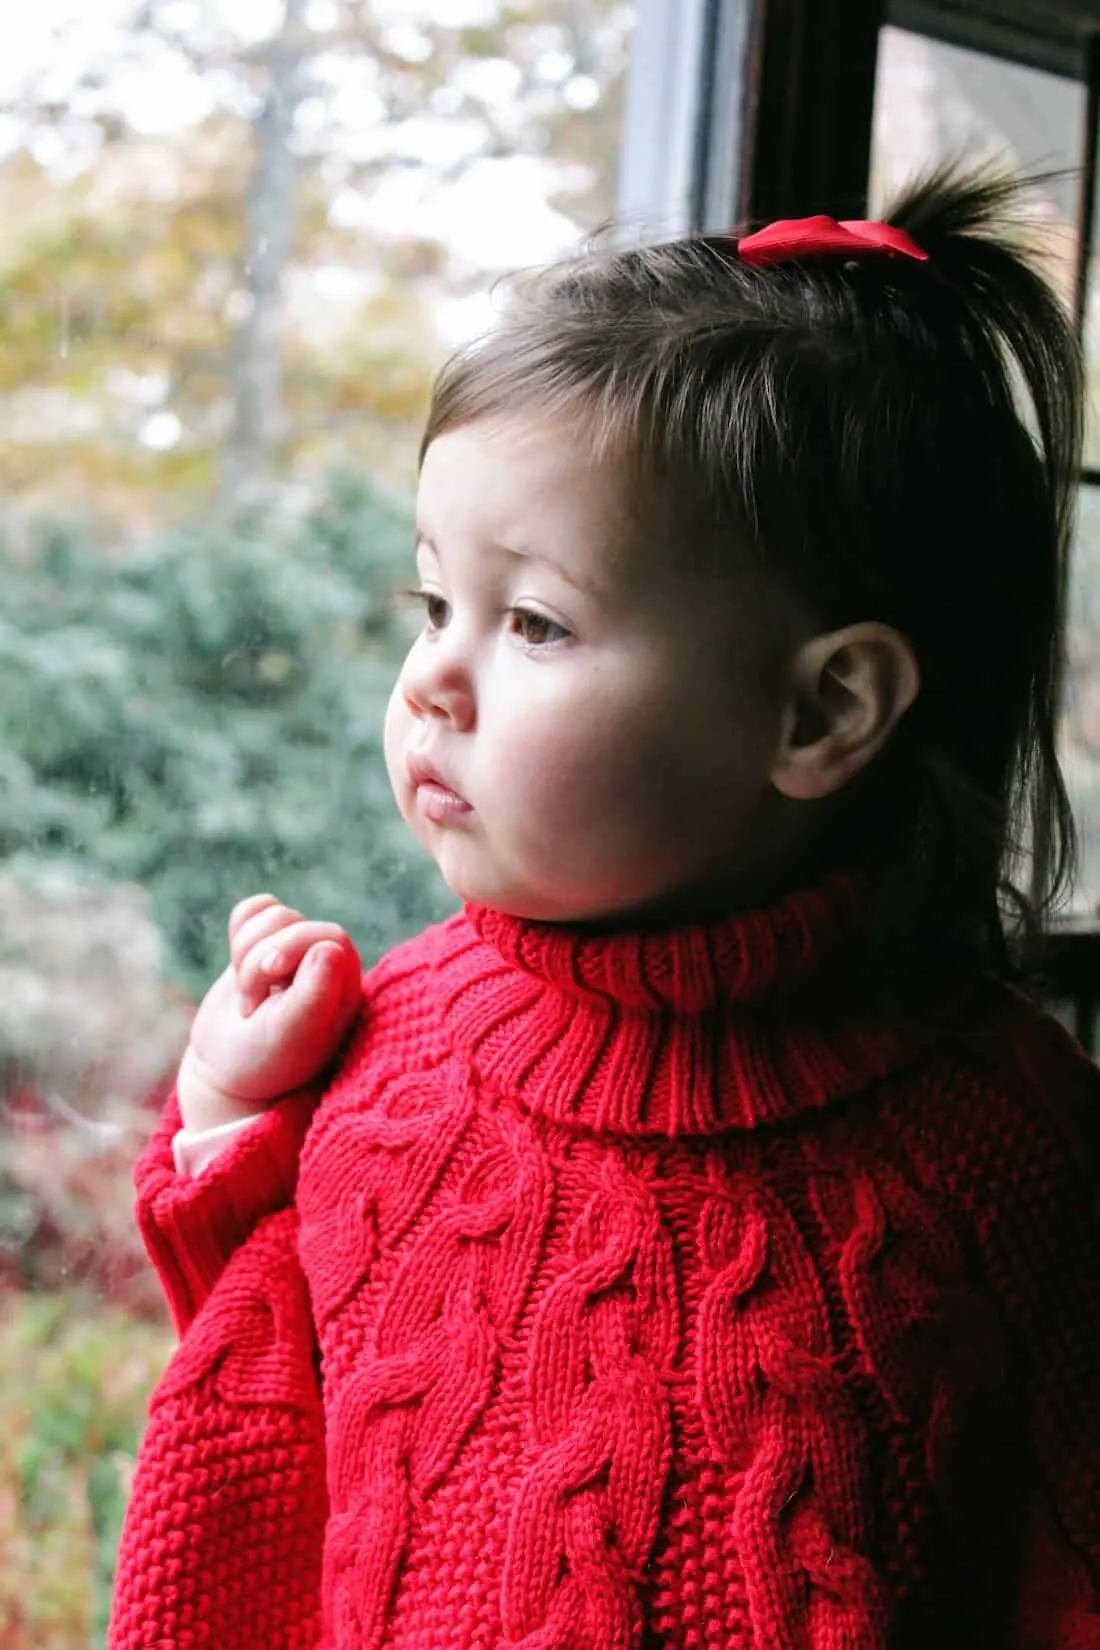 Toddler girl in red Christmas sweeter stares out window.